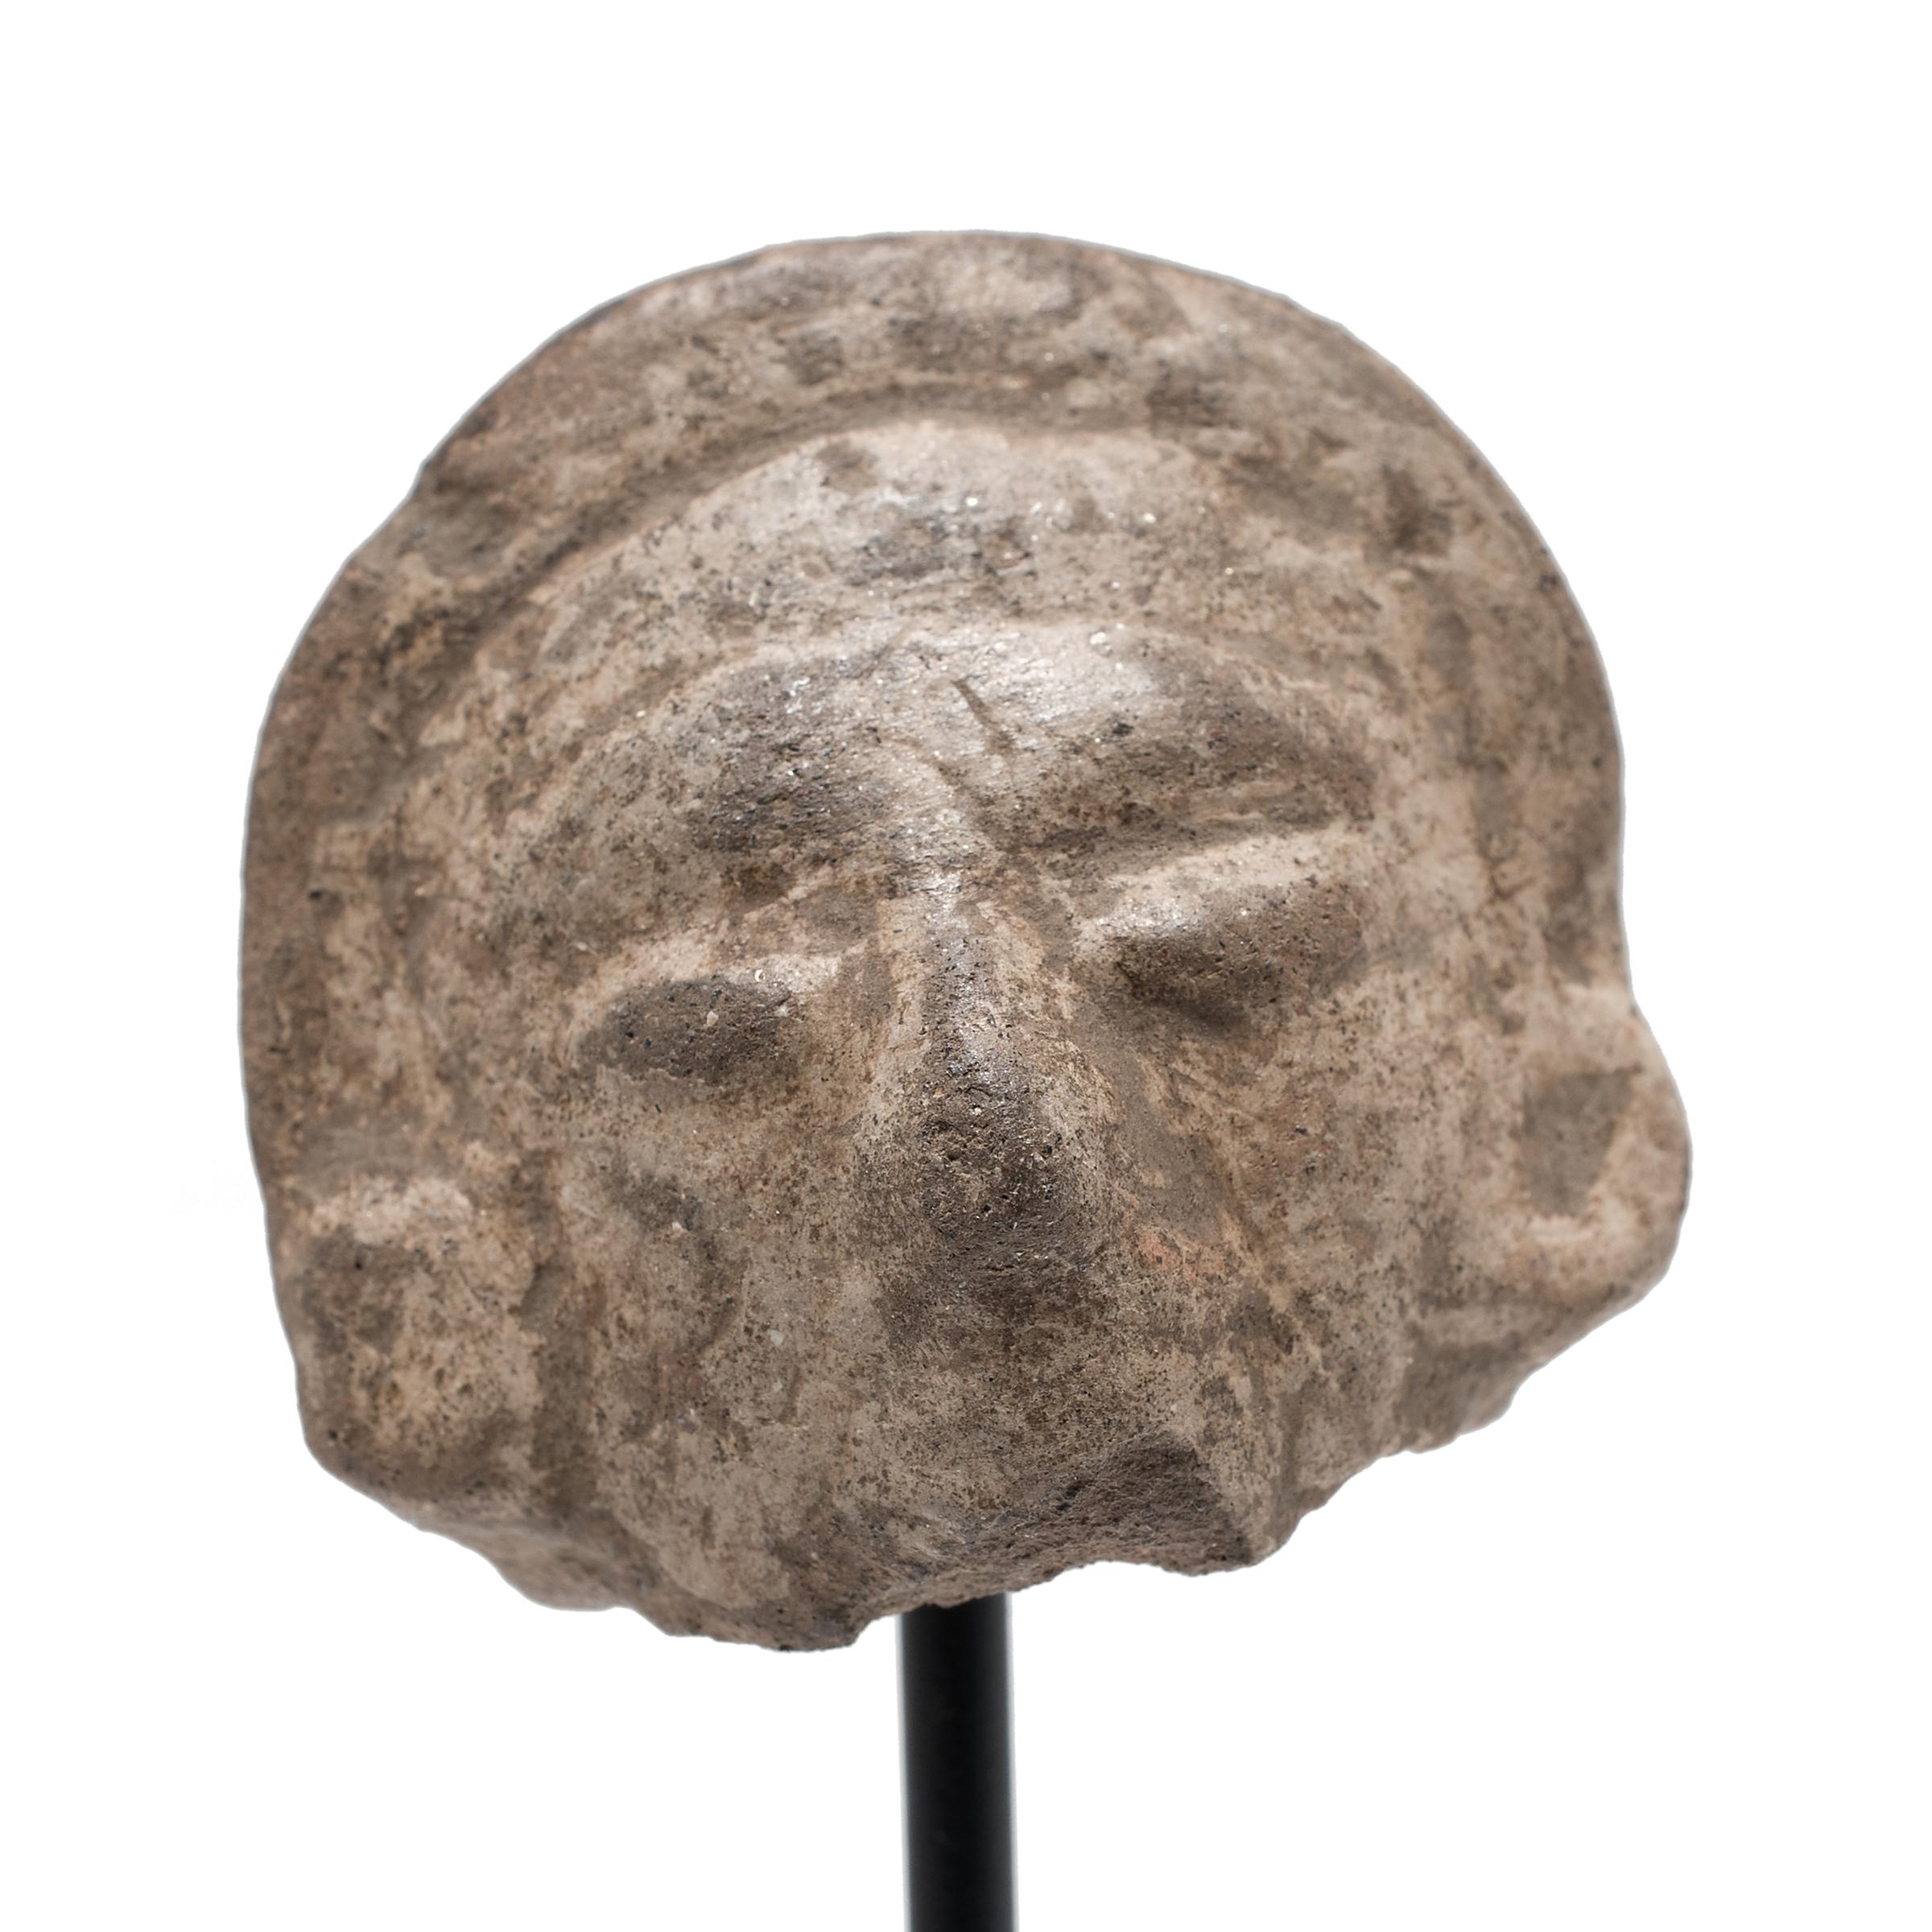 This intriguing head fragment was once attached to a pre-Columbian bust or full effigy figurine. Earthenware figurines like this were made in great abundance throughout Mesoamerican history, serving a wide variety of purposes and functions from